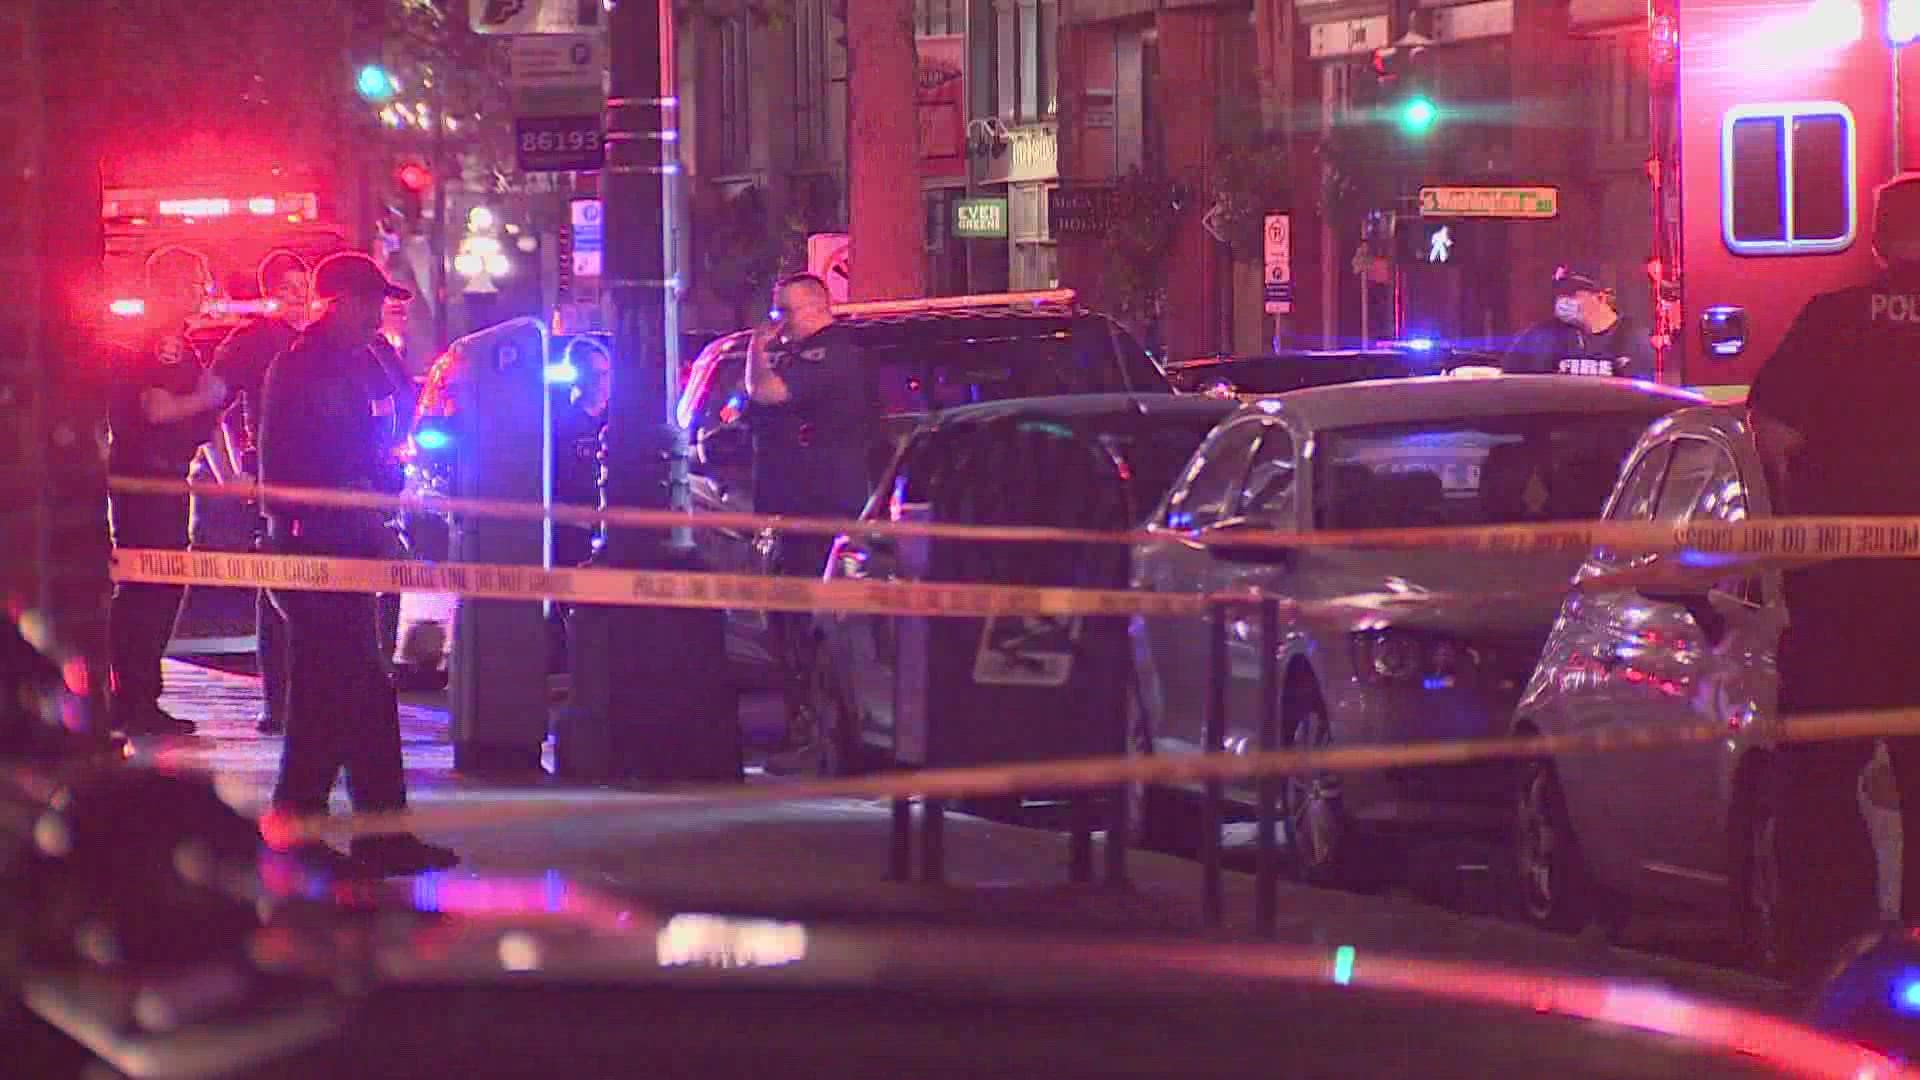 Police are investigating a shooting overnight in Seattle's Pioneer Square. One person was injured. No word on what caused the incident.